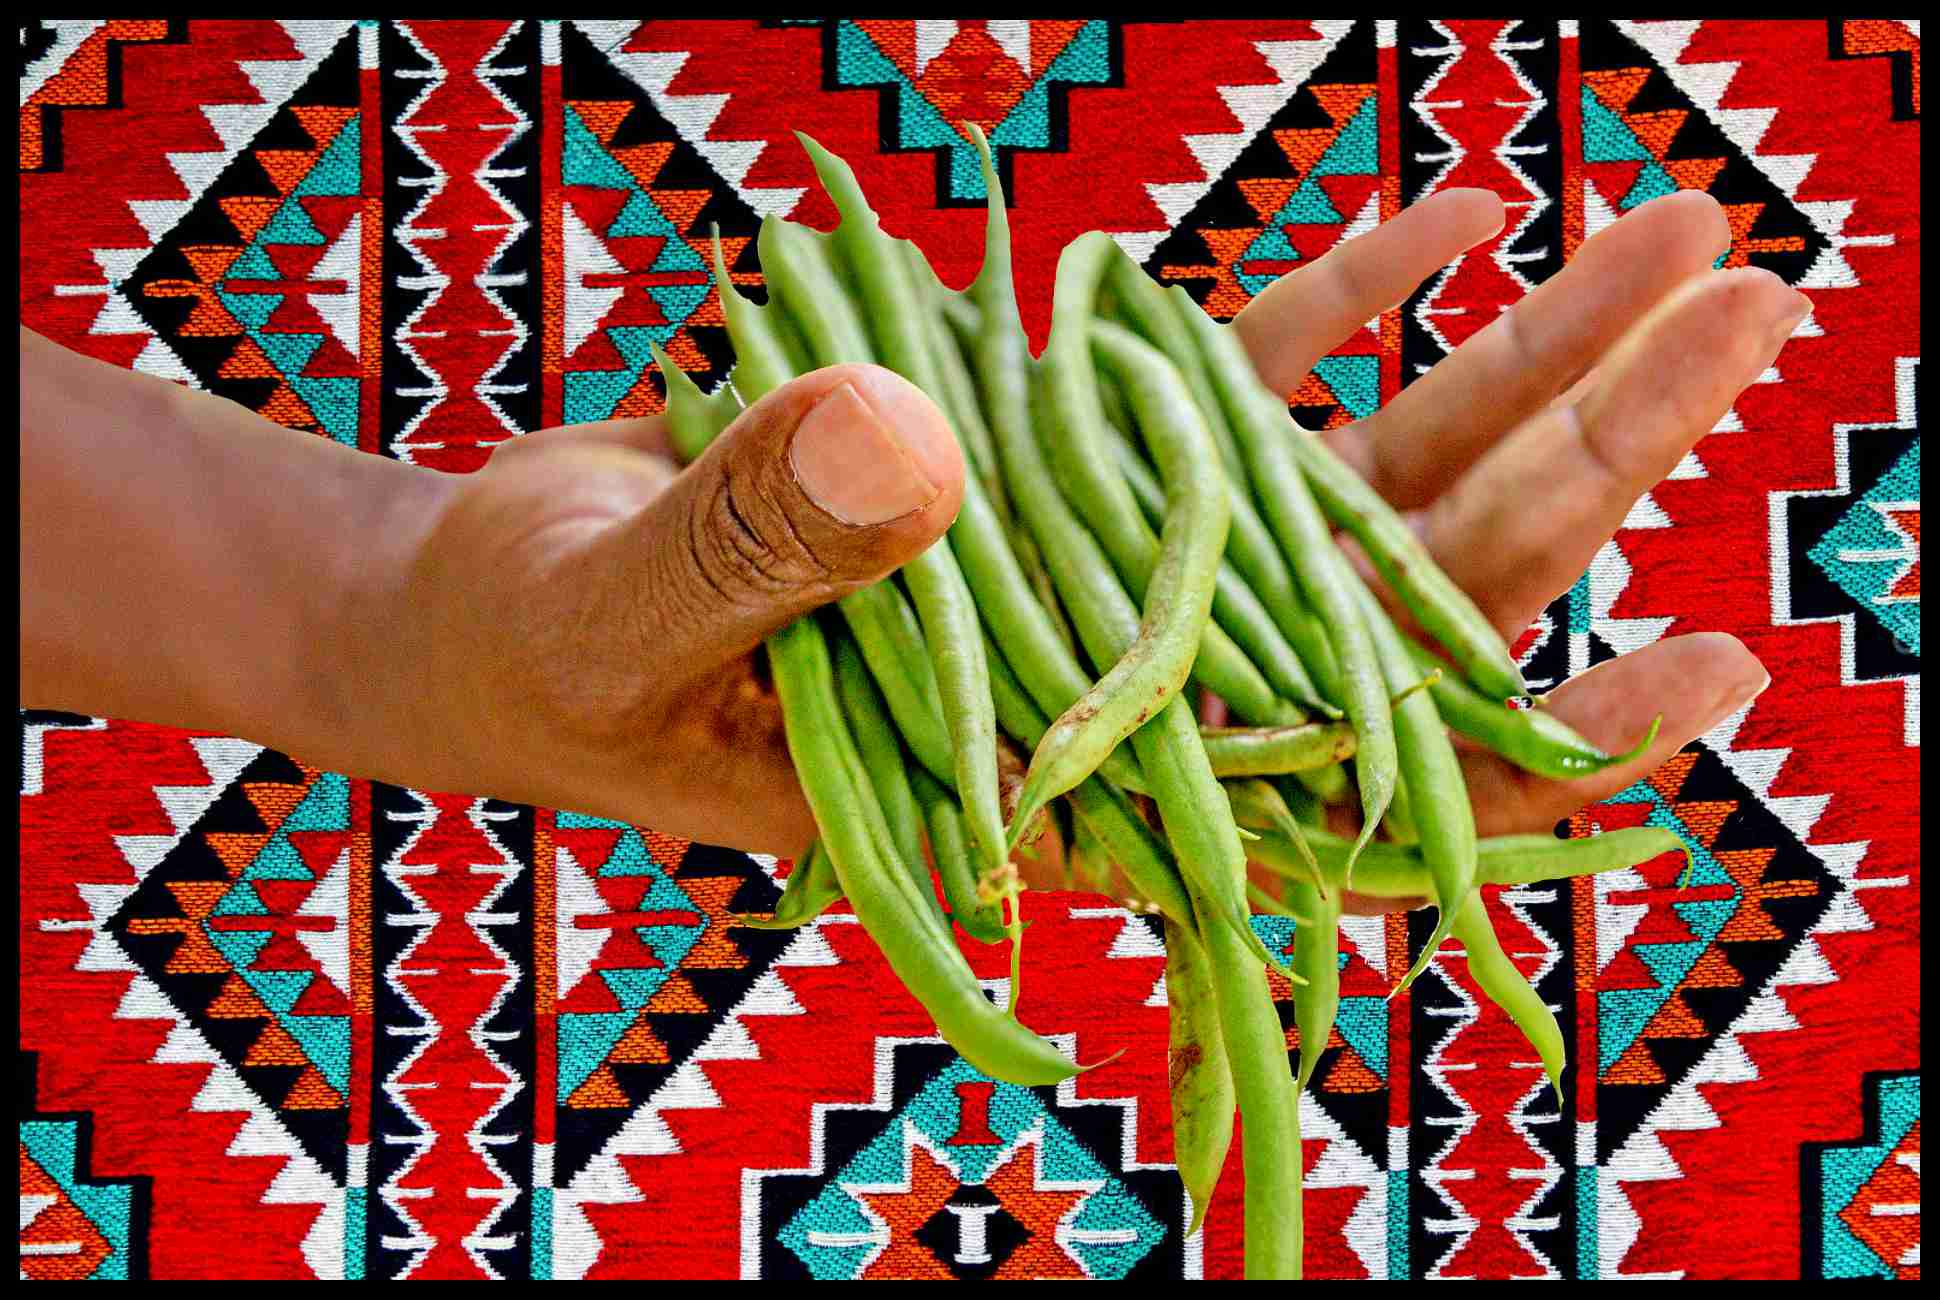 Vegetarian Green Beans; Tomato Sauce; Garlic; Onions; Parsley; My Mom's Recipe; Petra Dining; Culinary Delight; Plant-Based Gastronomy; Jordanian Vegetarian Cuisine; Fine Dining Petra; Savory Green Beans Dish; Top Petra Restaurant; Exquisite Vegetarian Green Beans; Petra Gastronomy; Best Green Beans in Tomato Sauce; Unique Culinary Experience; Petra's Vegetarian Specials; Premium Plant-Based Offering; Jordanian Culinary Gem; Green Beans Gastronomic Delight.